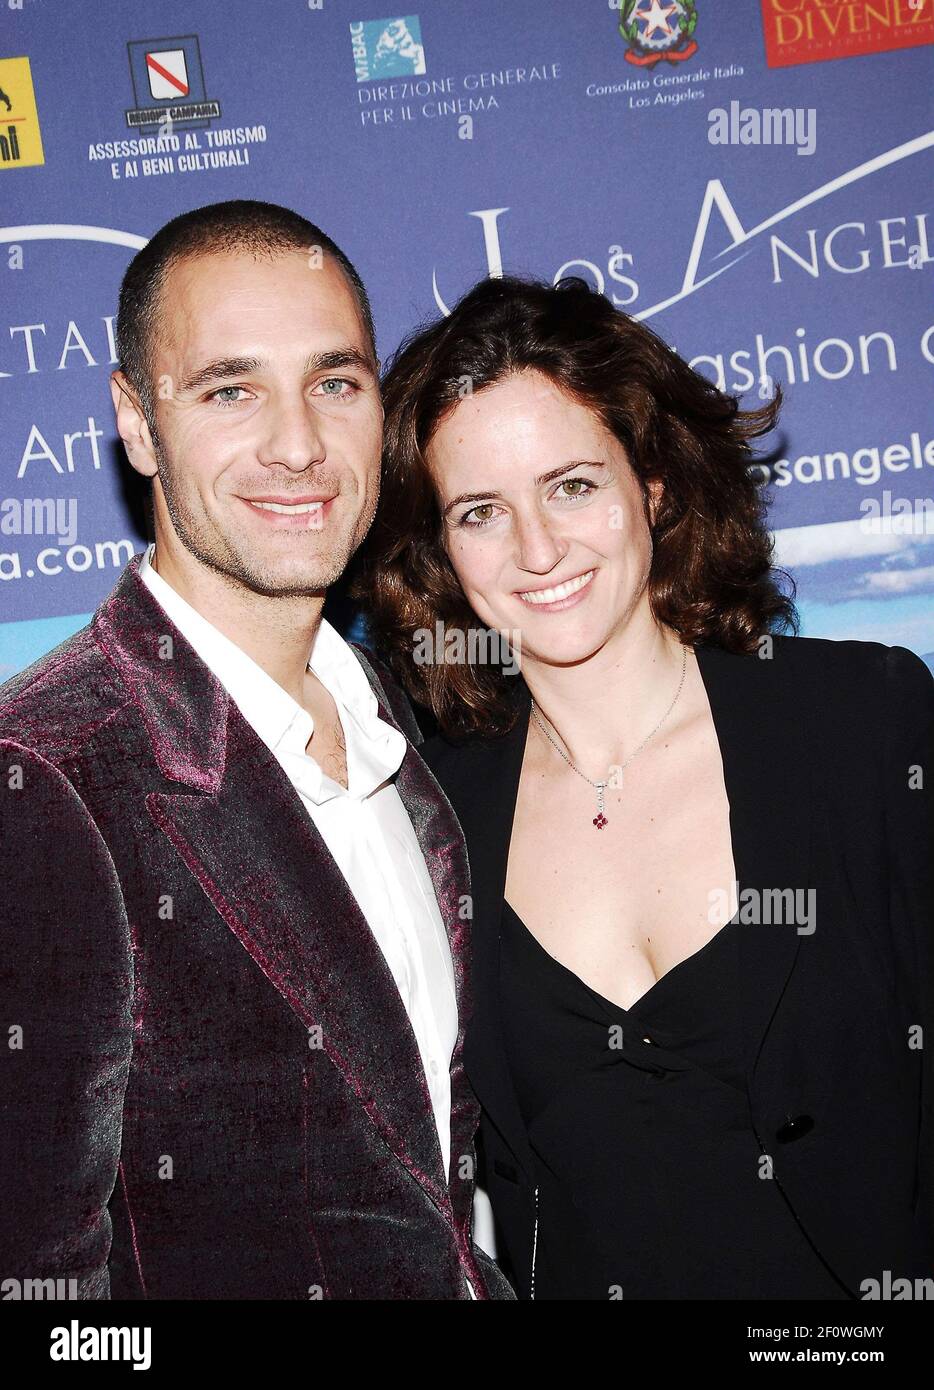 Raoul Bova and his wife Chiara Giordano. 17 February 2008 - Hollywood, California. 3rd Annual Los Angeles-Italia Film, Fashion and Art Fest at The Trastevere Restaurant and Chinese Theatre. Photo Credit: Giulio Marcocchi/Sipa Press. (') Copyright 2008 by Giulio Marcocchi./laitalia_gm.084/0802181224 Stock Photo